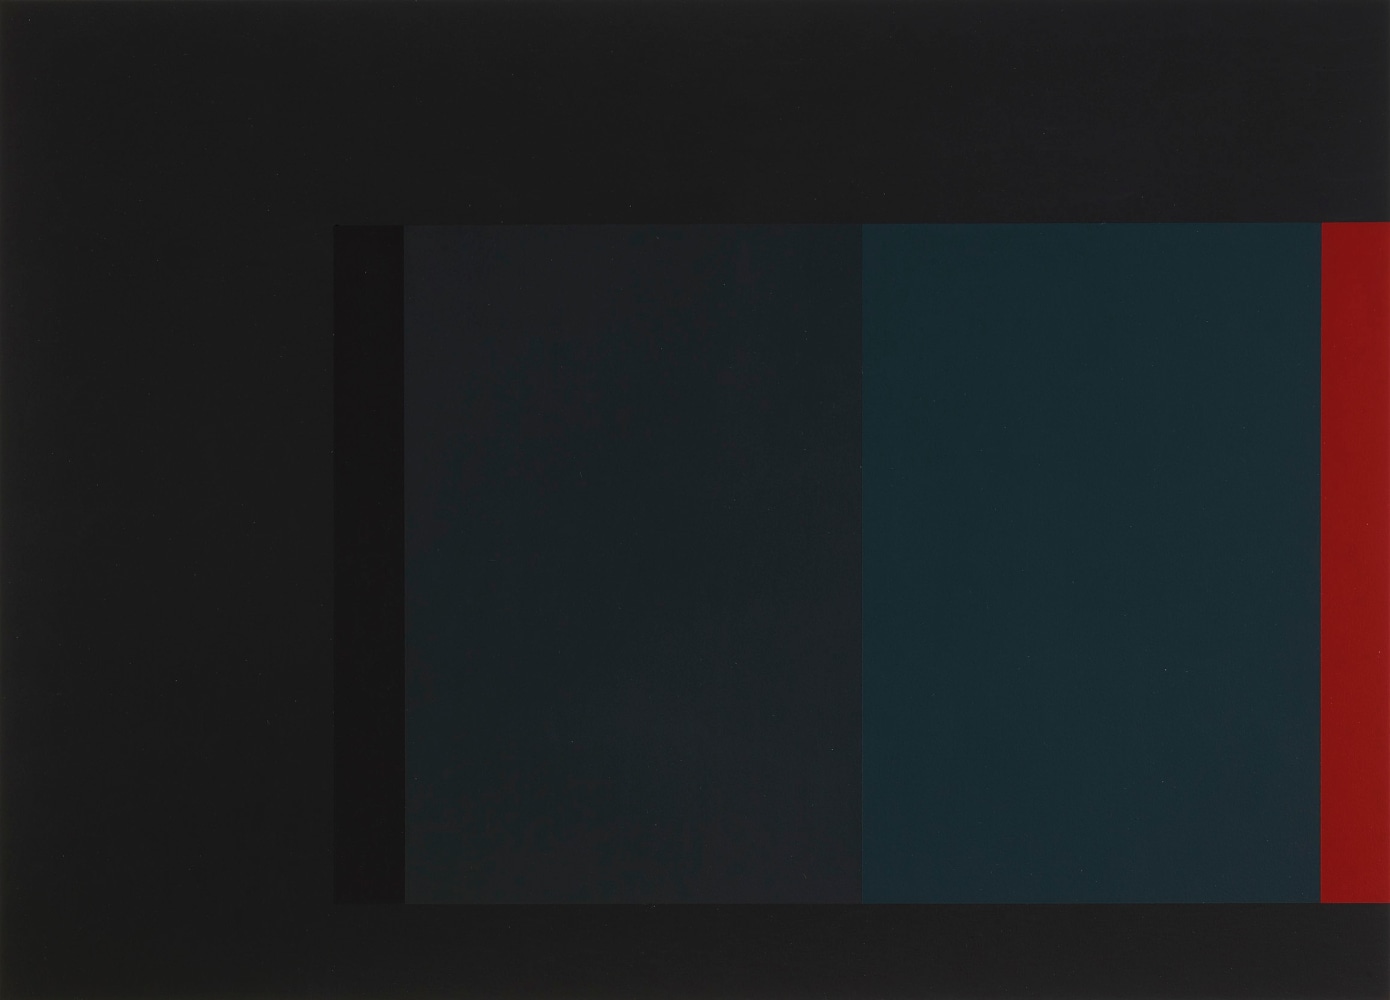 Encke, 1985

acrylic on paper

22 3/4 x 28 1/2 inches;&amp;nbsp;57.8 x 72.4 centimeters

LSFA# 11725